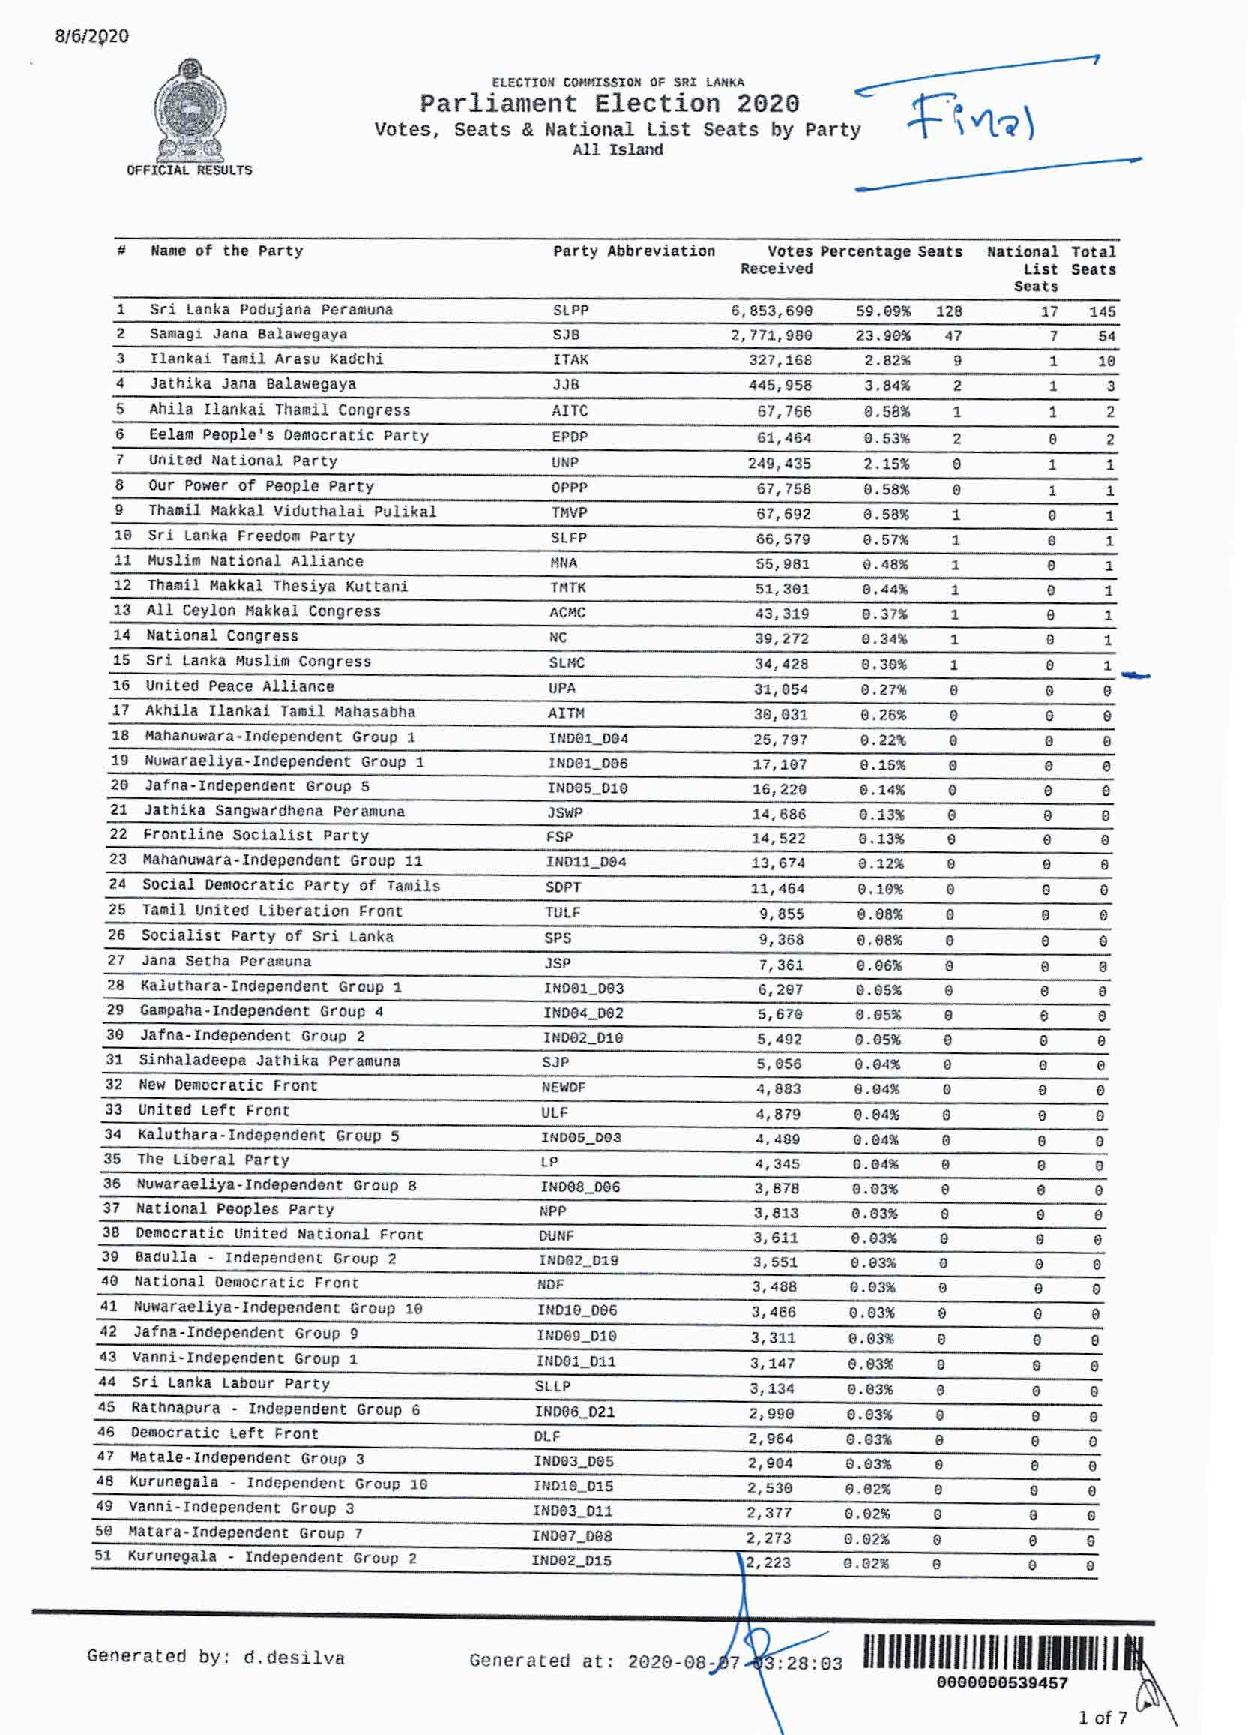 Final Votes Seats and National List min page 001